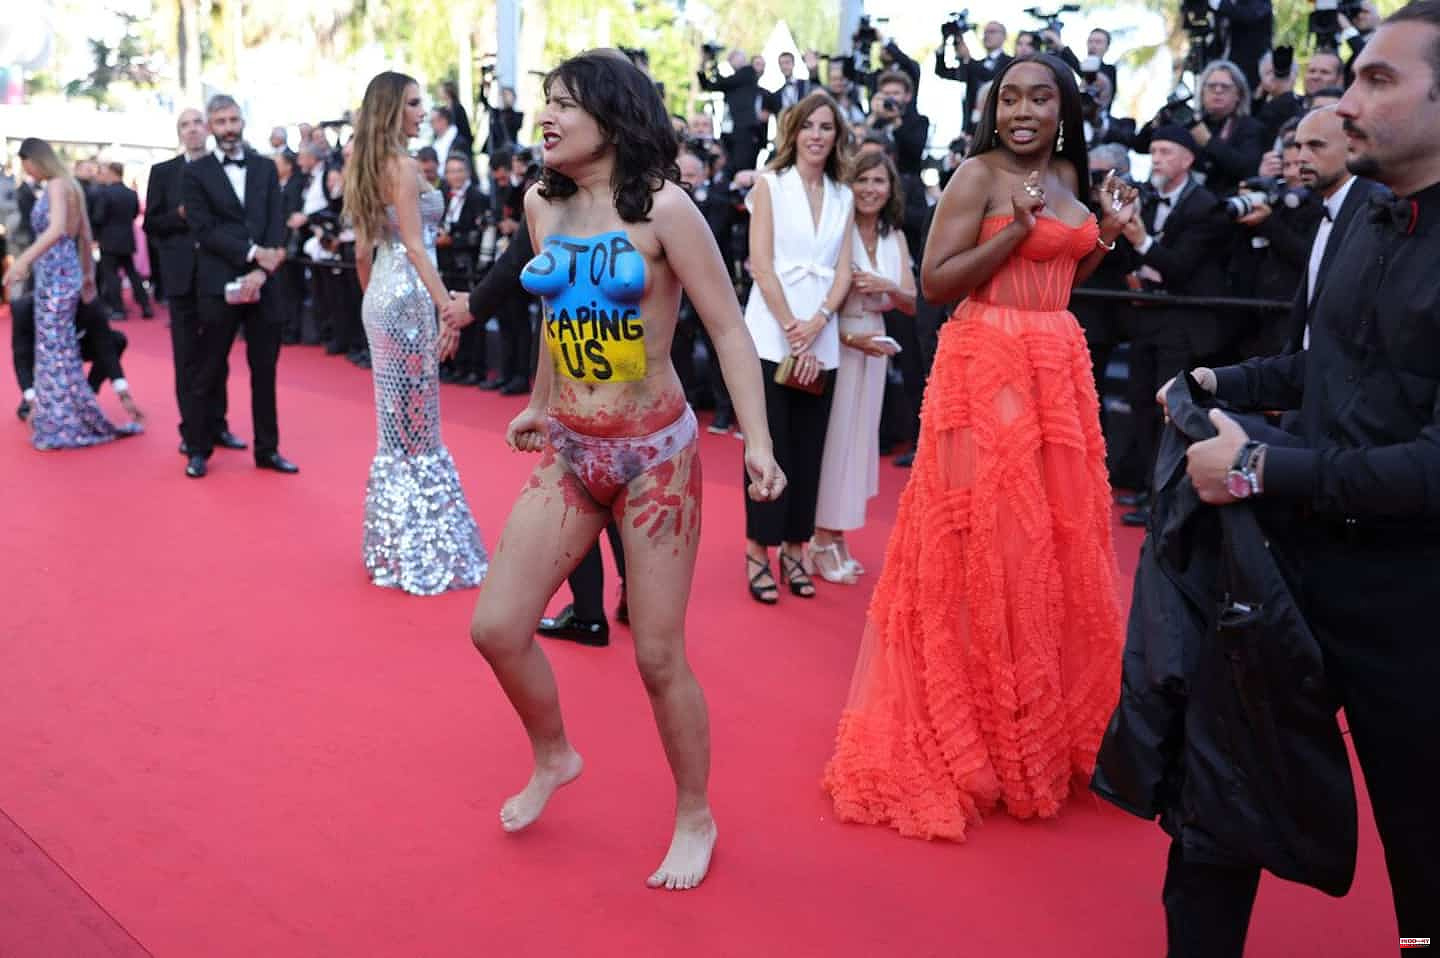 [PHOTOS] A woman denounces Russian rapes in Ukraine on the Cannes red carpet